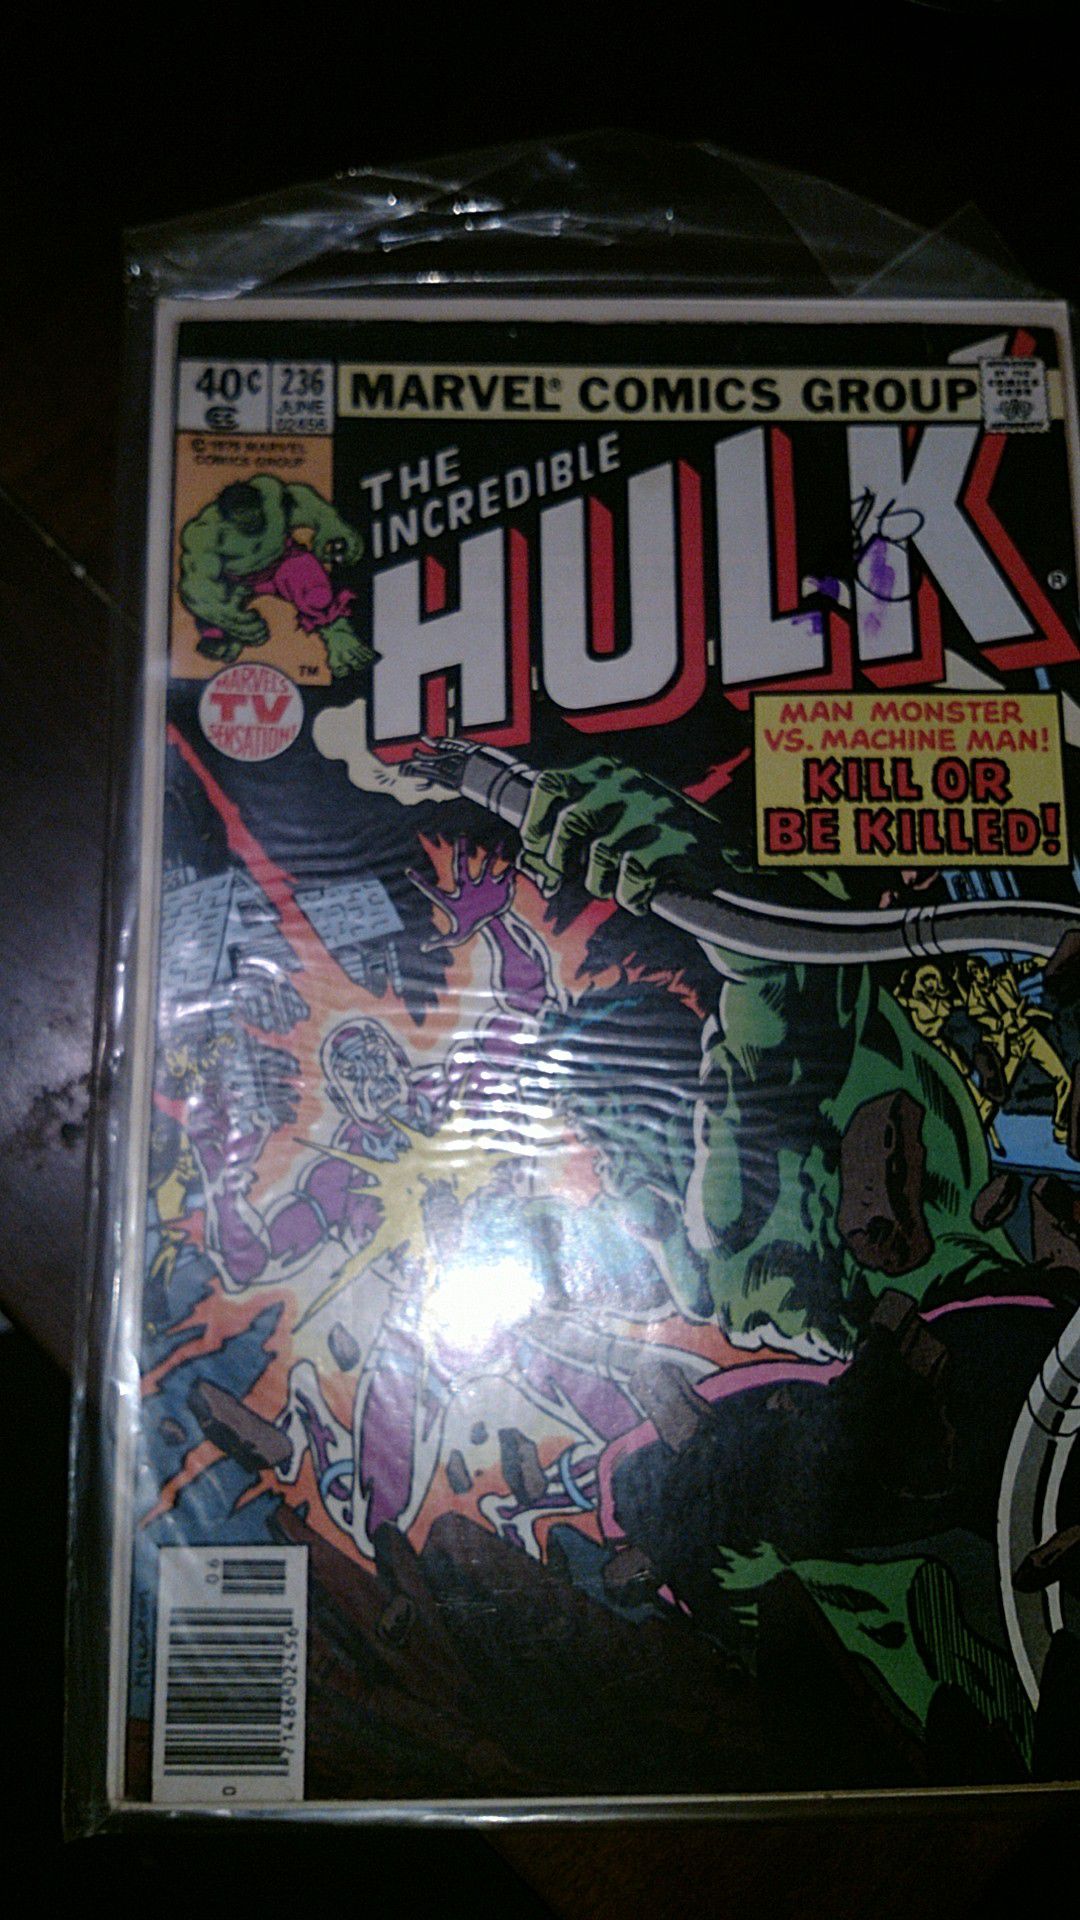 Marvel comics incredible hulk issue number 236